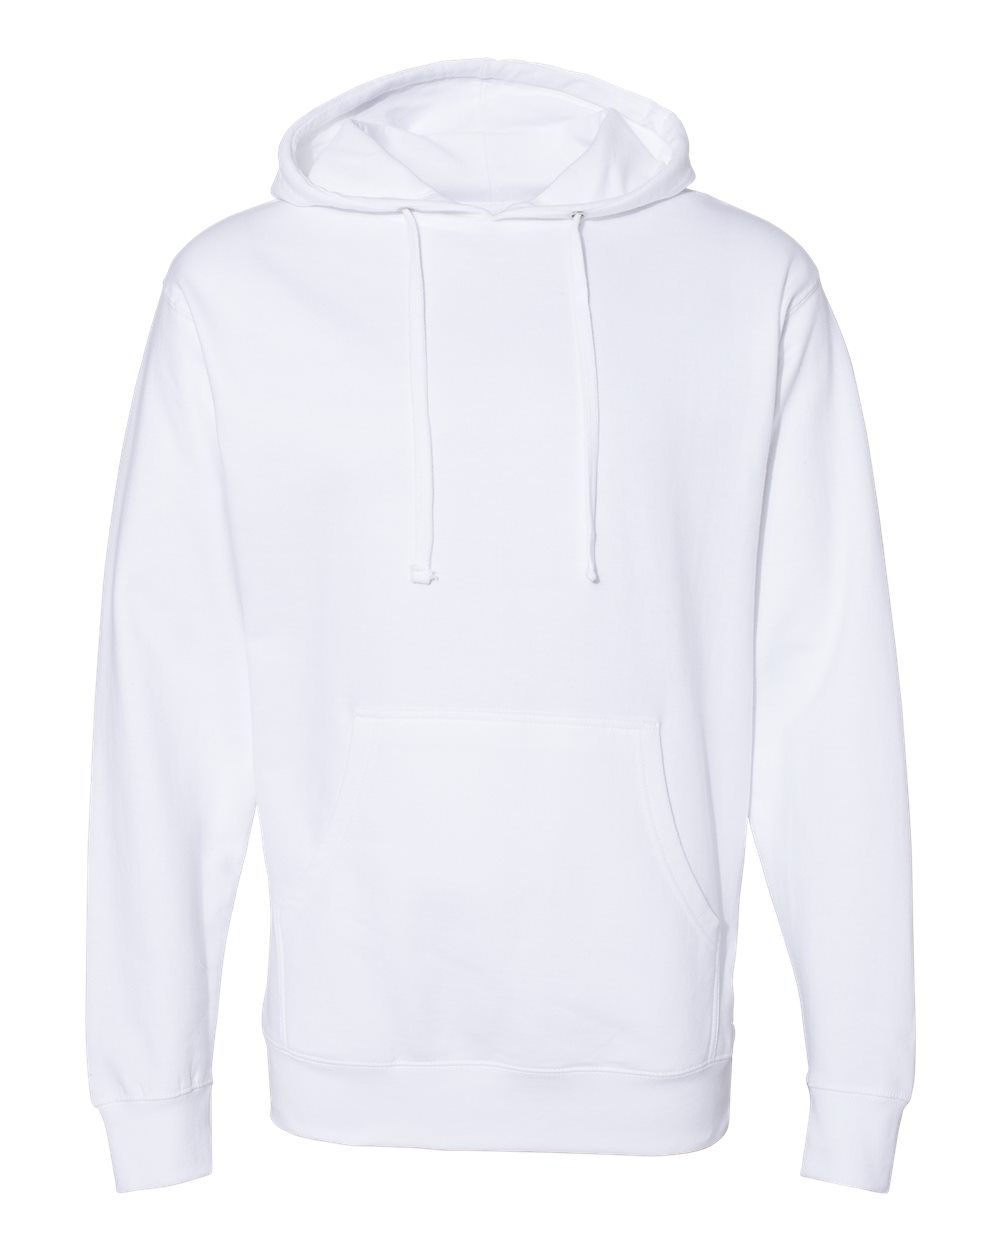 Midweight Hooded Sweatshirt-Independent Trading Co.